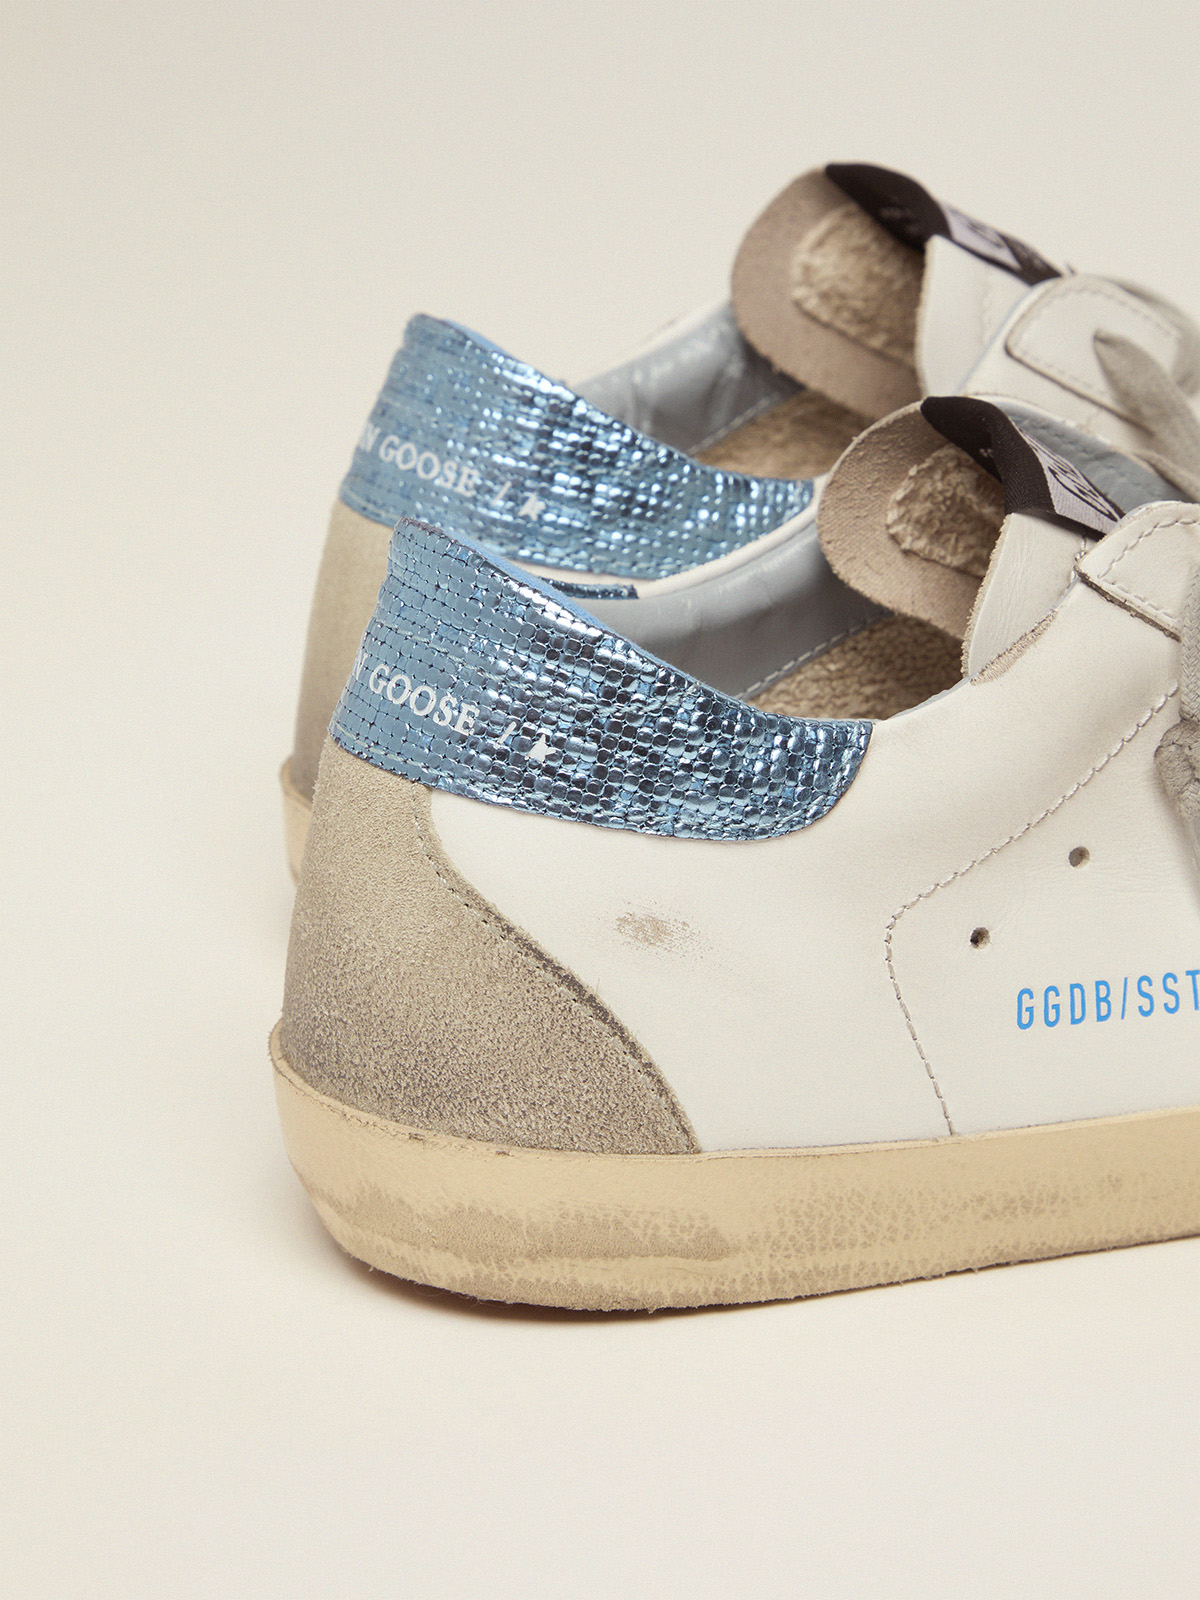 White Super-Star LTD sneakers with blue laminated heel tab | Golden Goose